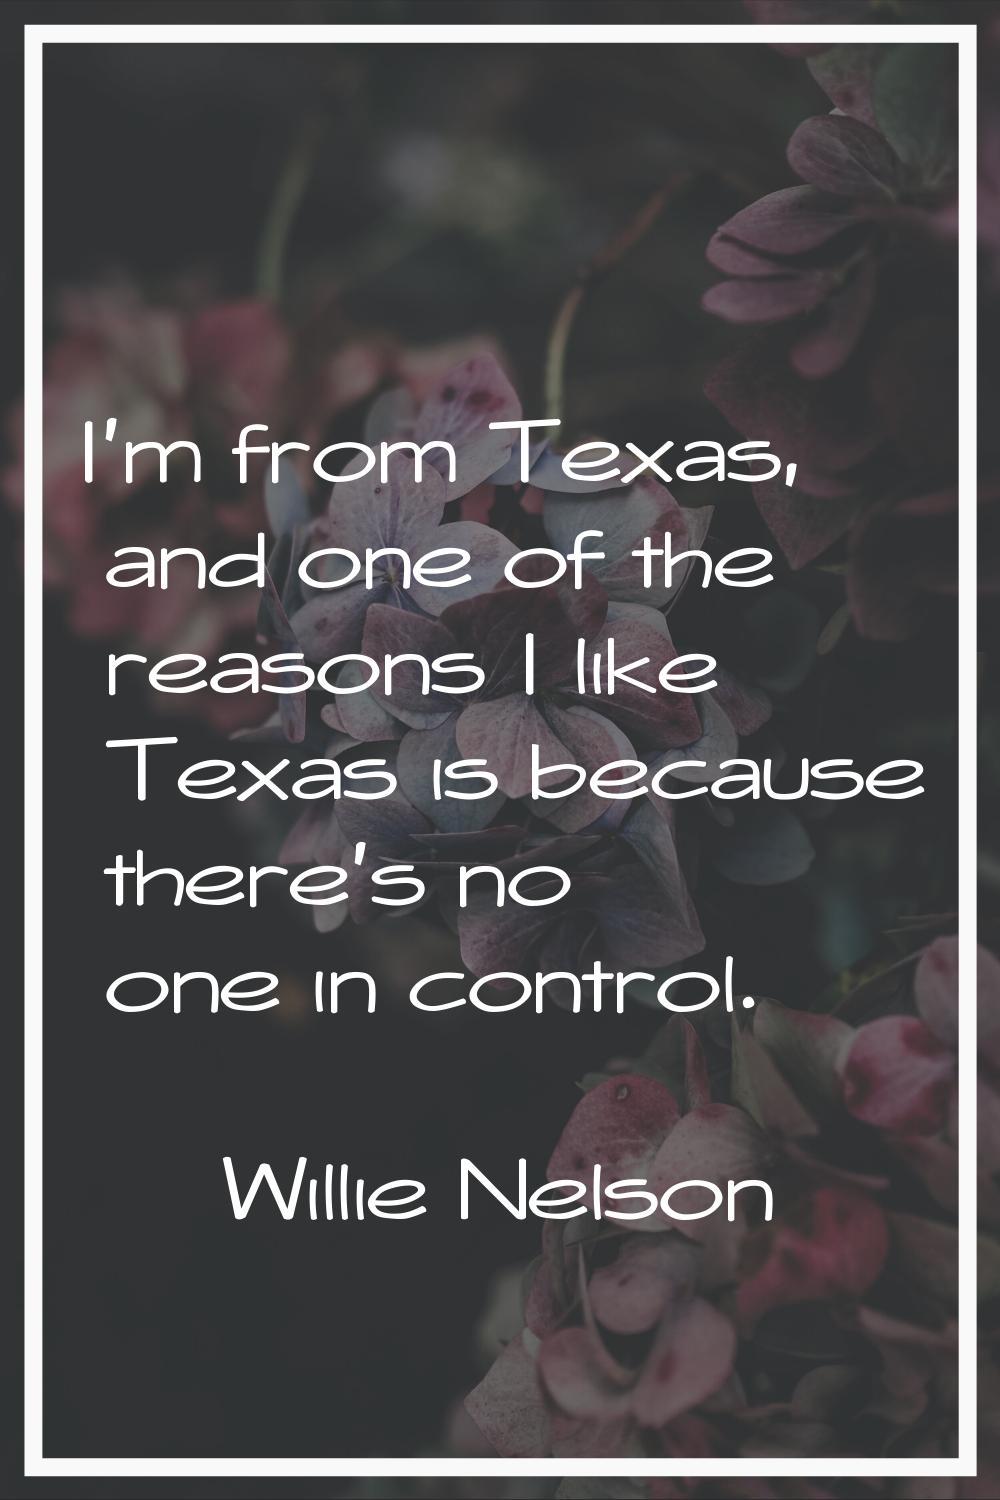 I'm from Texas, and one of the reasons I like Texas is because there's no one in control.